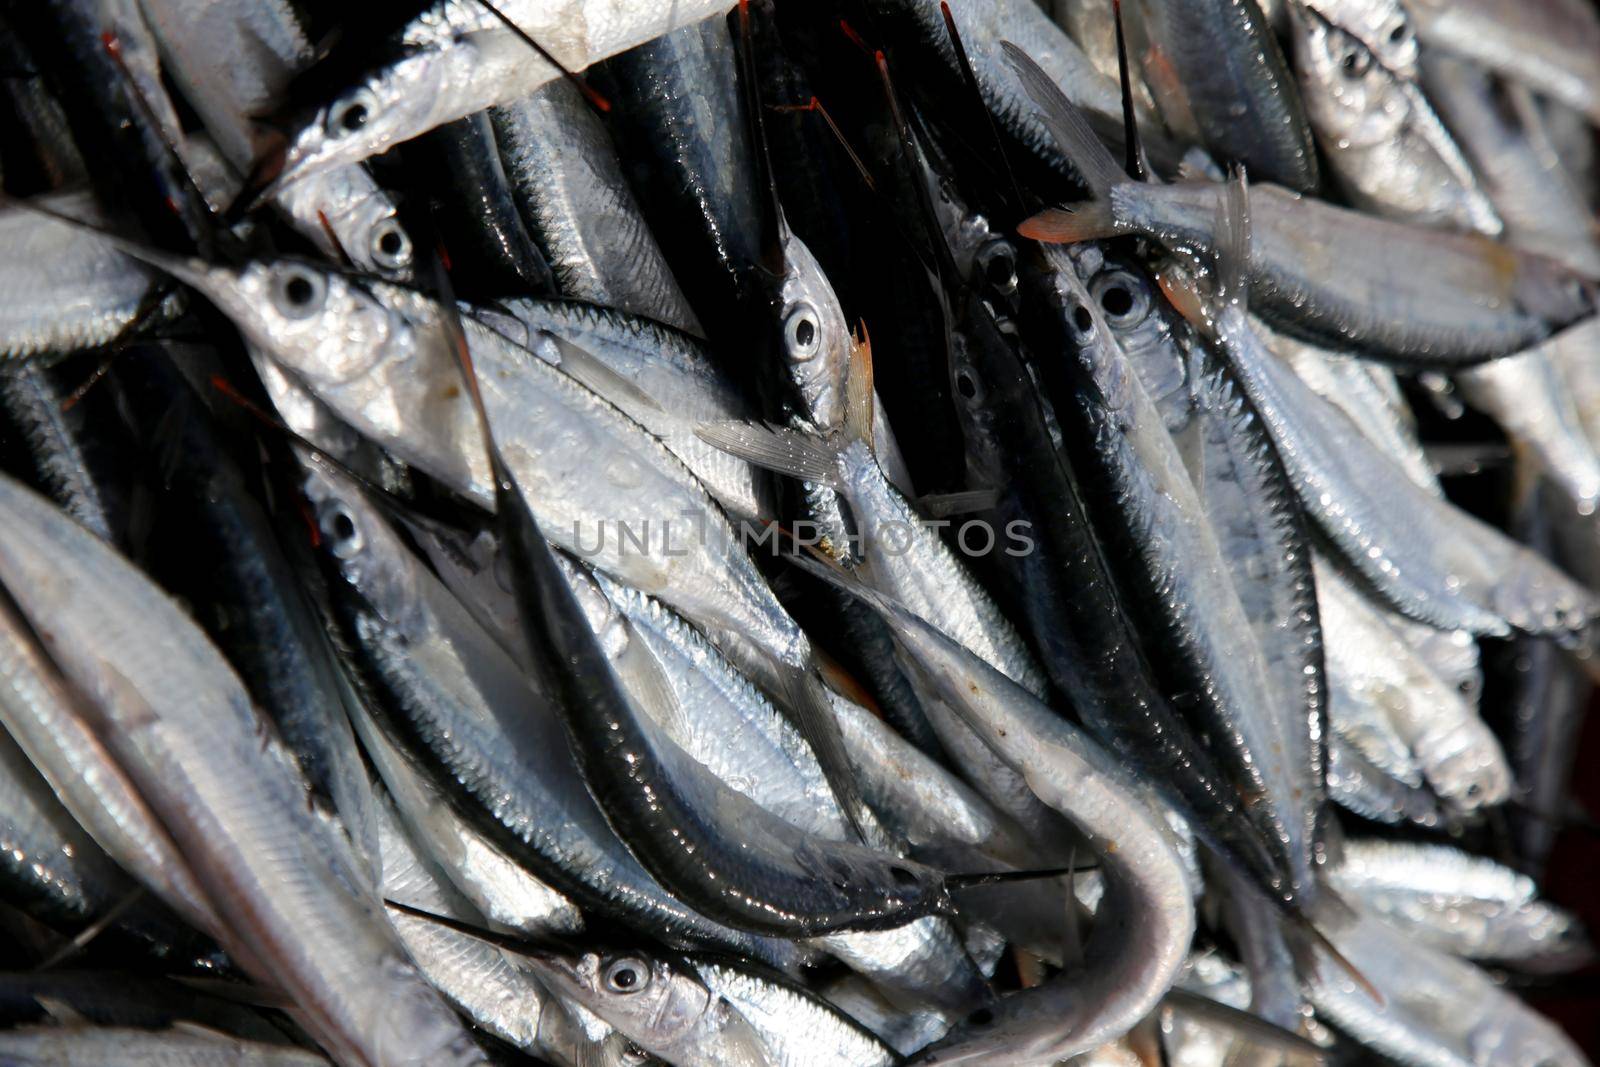 salvador, bahia, brazil - december 21, 2020: agulhinha fish is seen in an artisanal fishing boat on Itapua beach, in the city of Salvador.